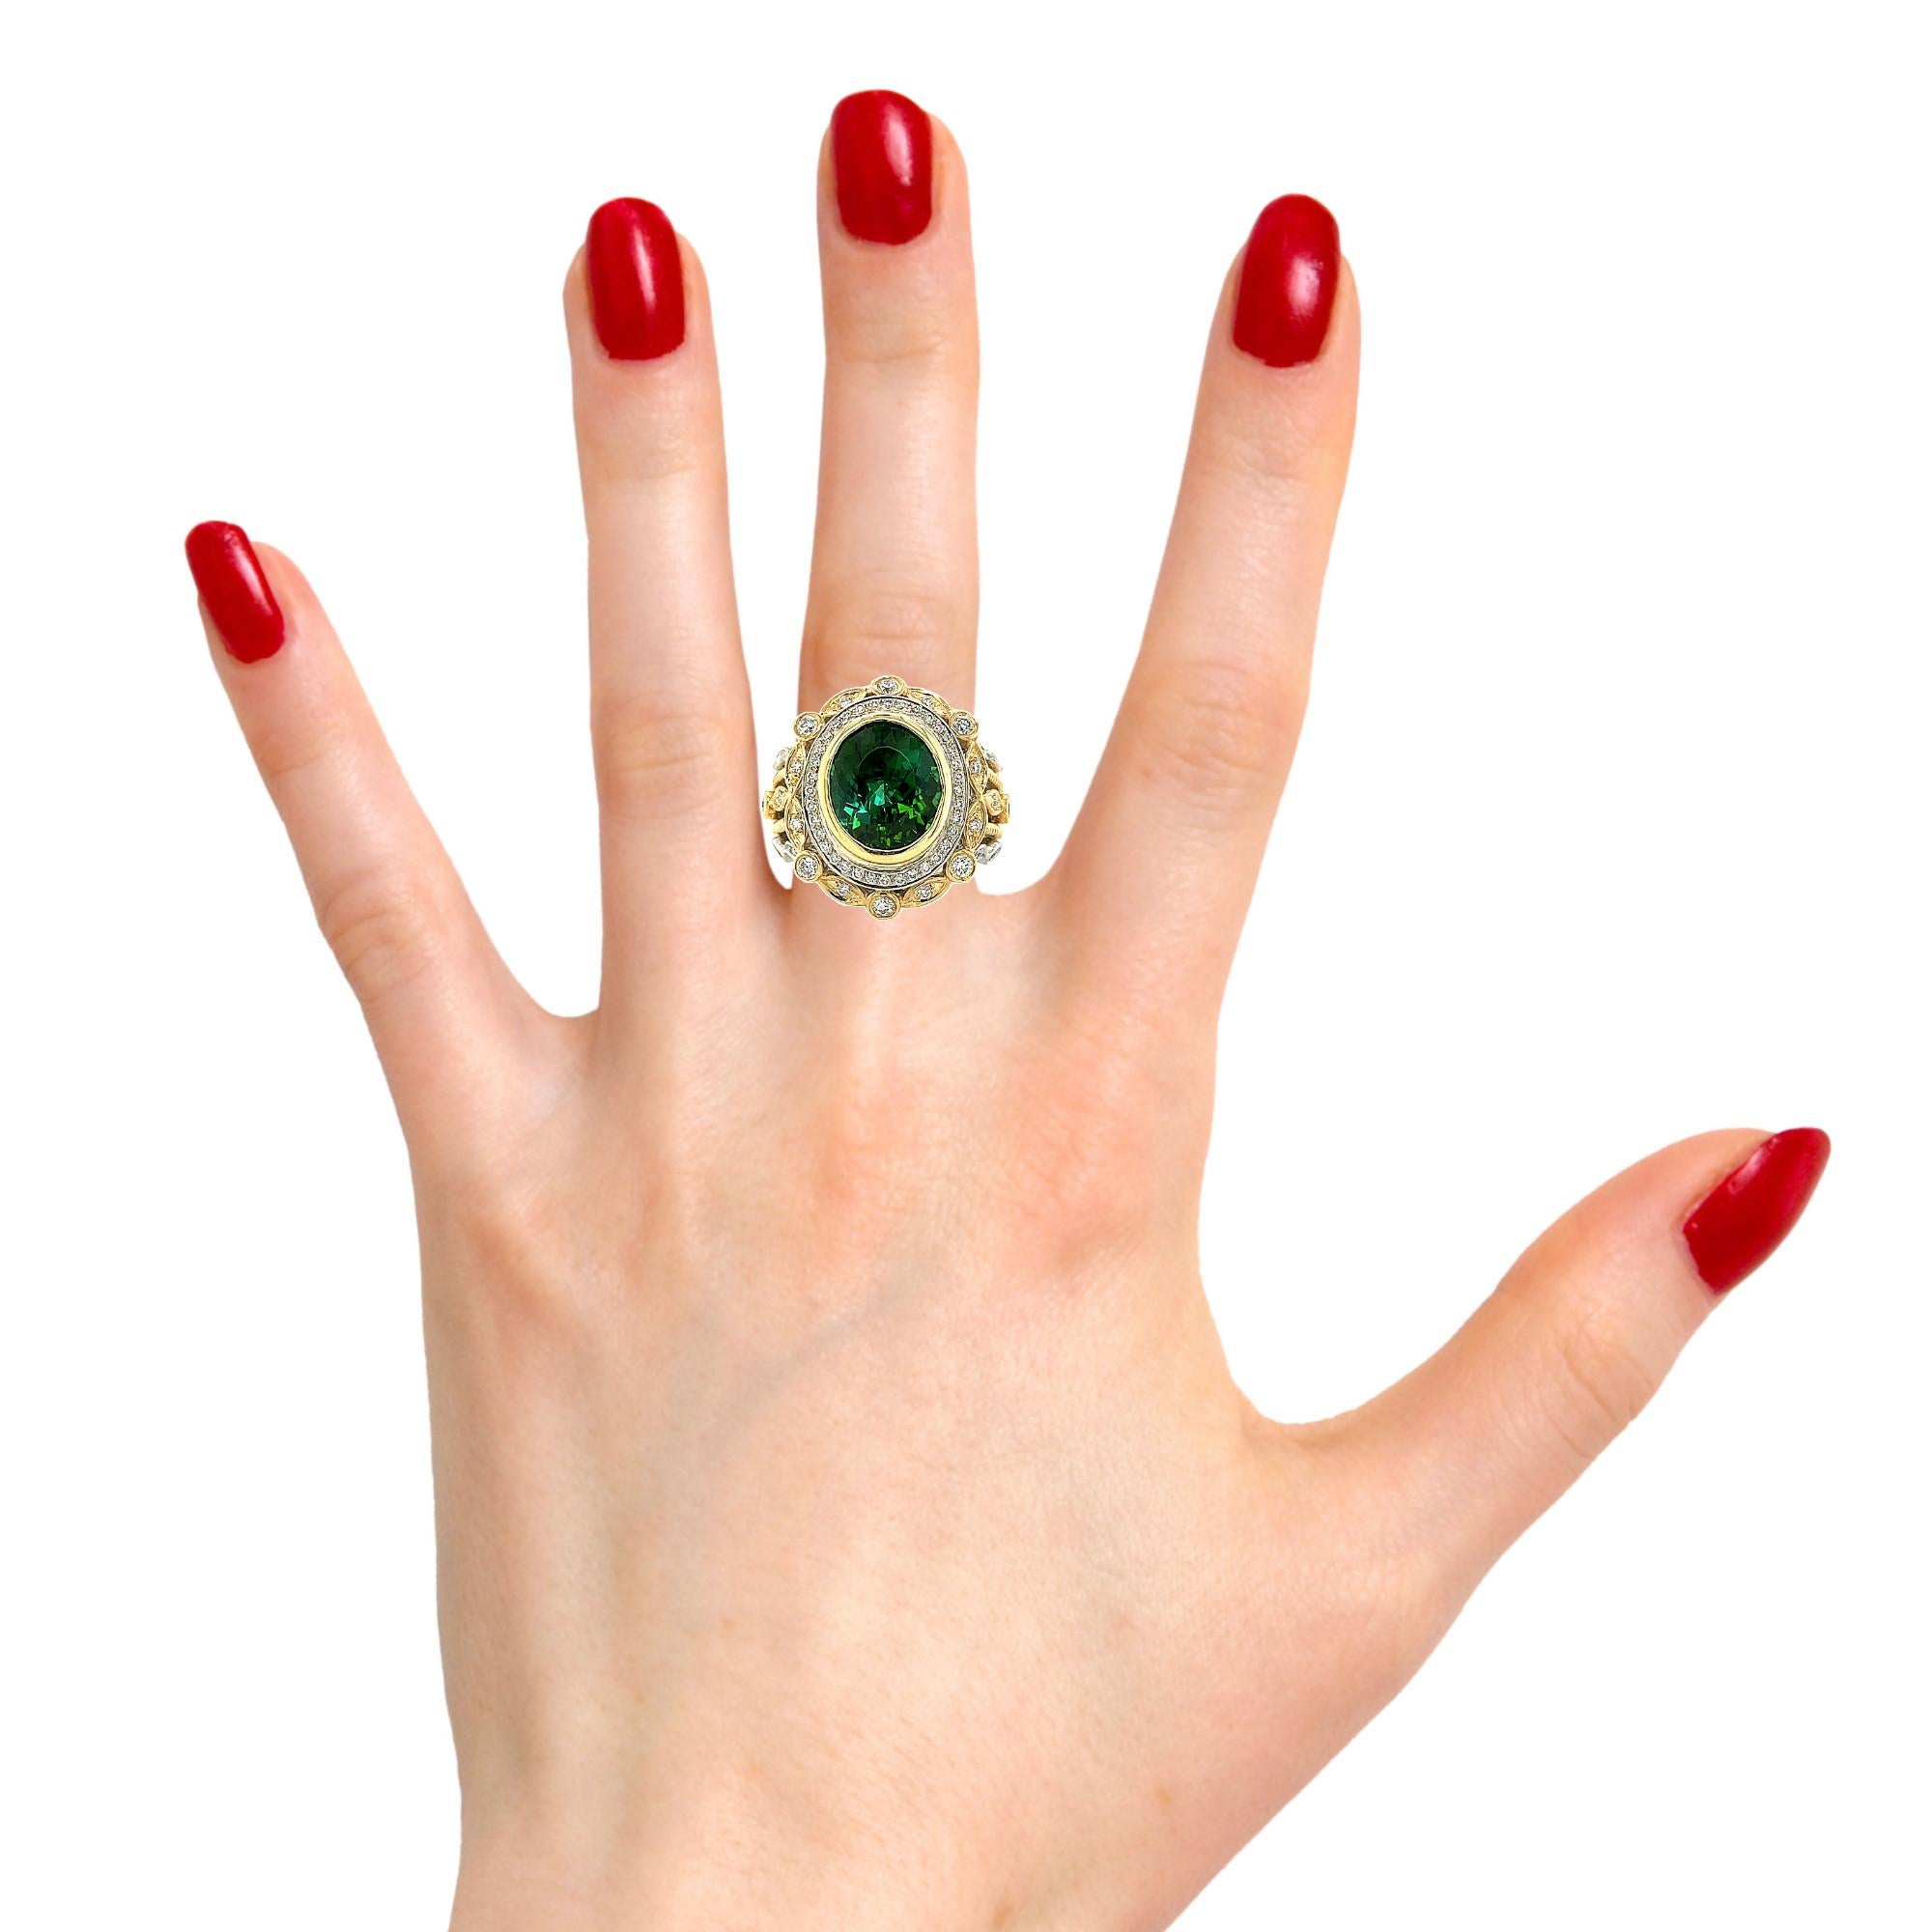 Green Tourmaline and Diamond Cocktail Ring in 18k Gold, 4.45 Carats For Sale 4